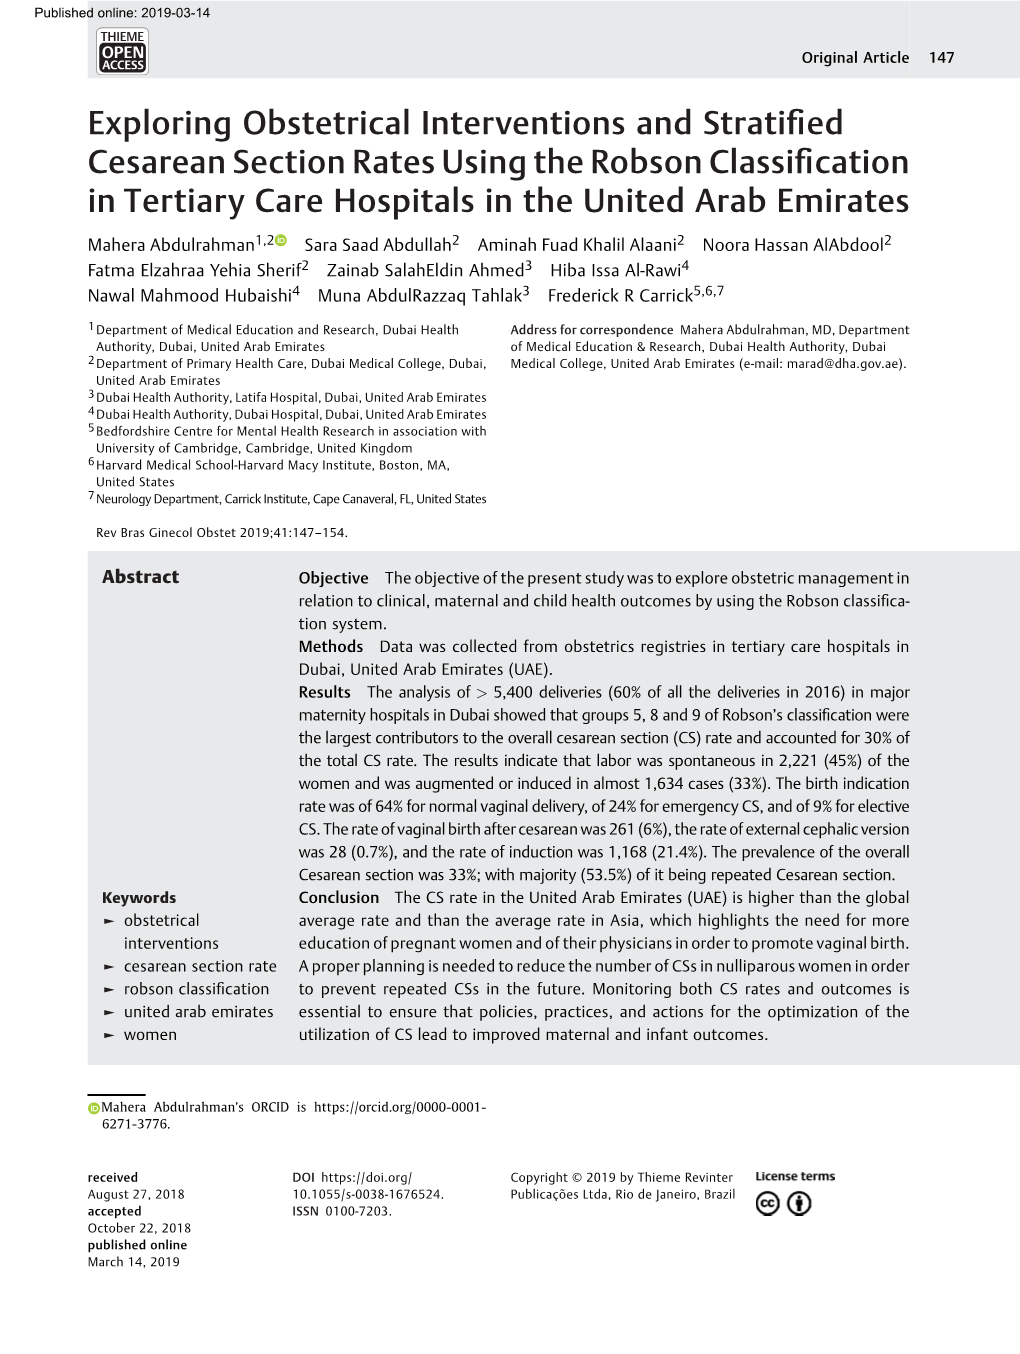 Exploring Obstetrical Interventions and Stratified Cesarean Section Abdulrahman Et Al